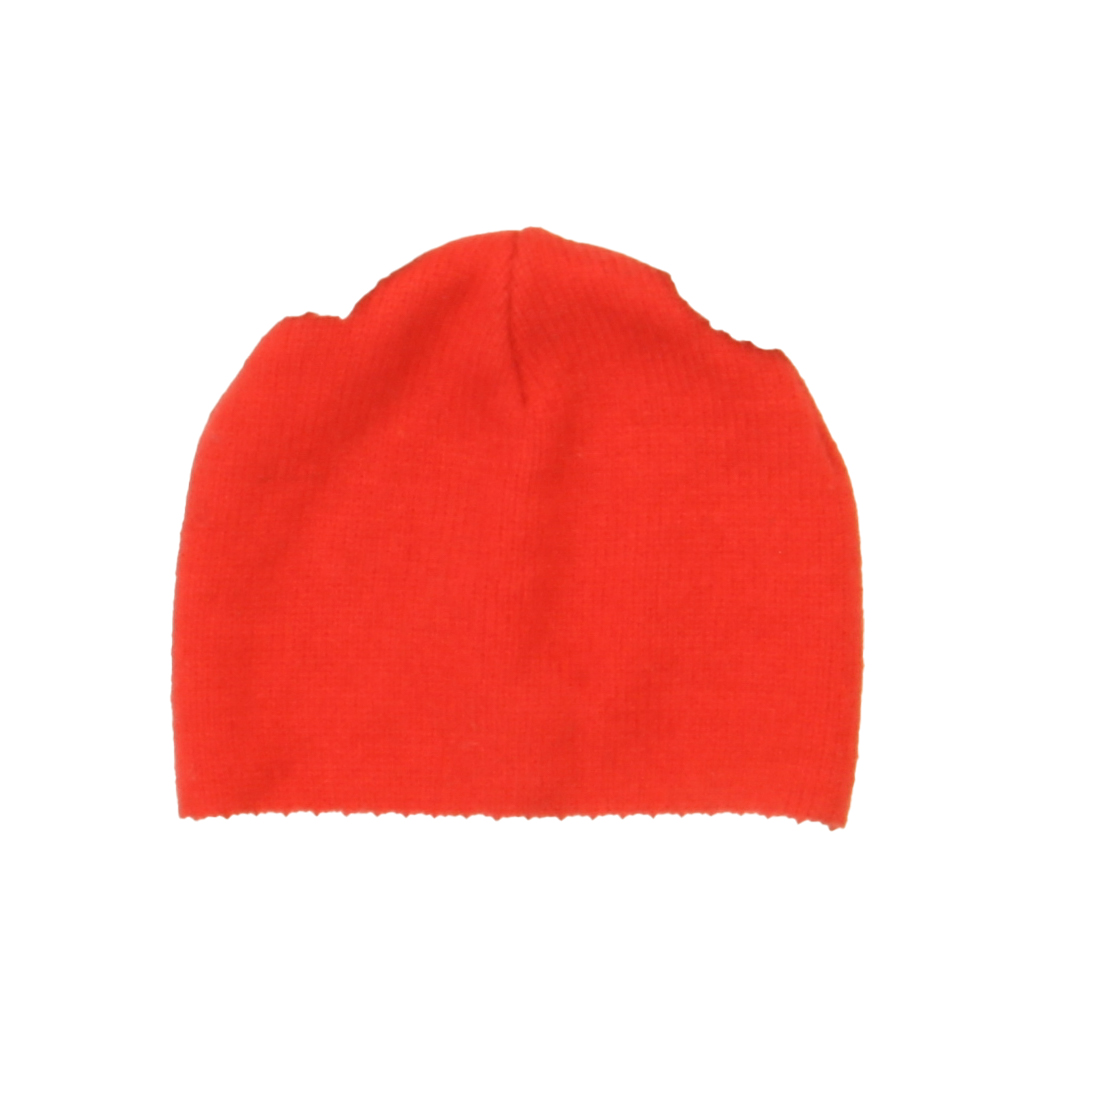 Unknown Brand Knit hat - ニットキャップ